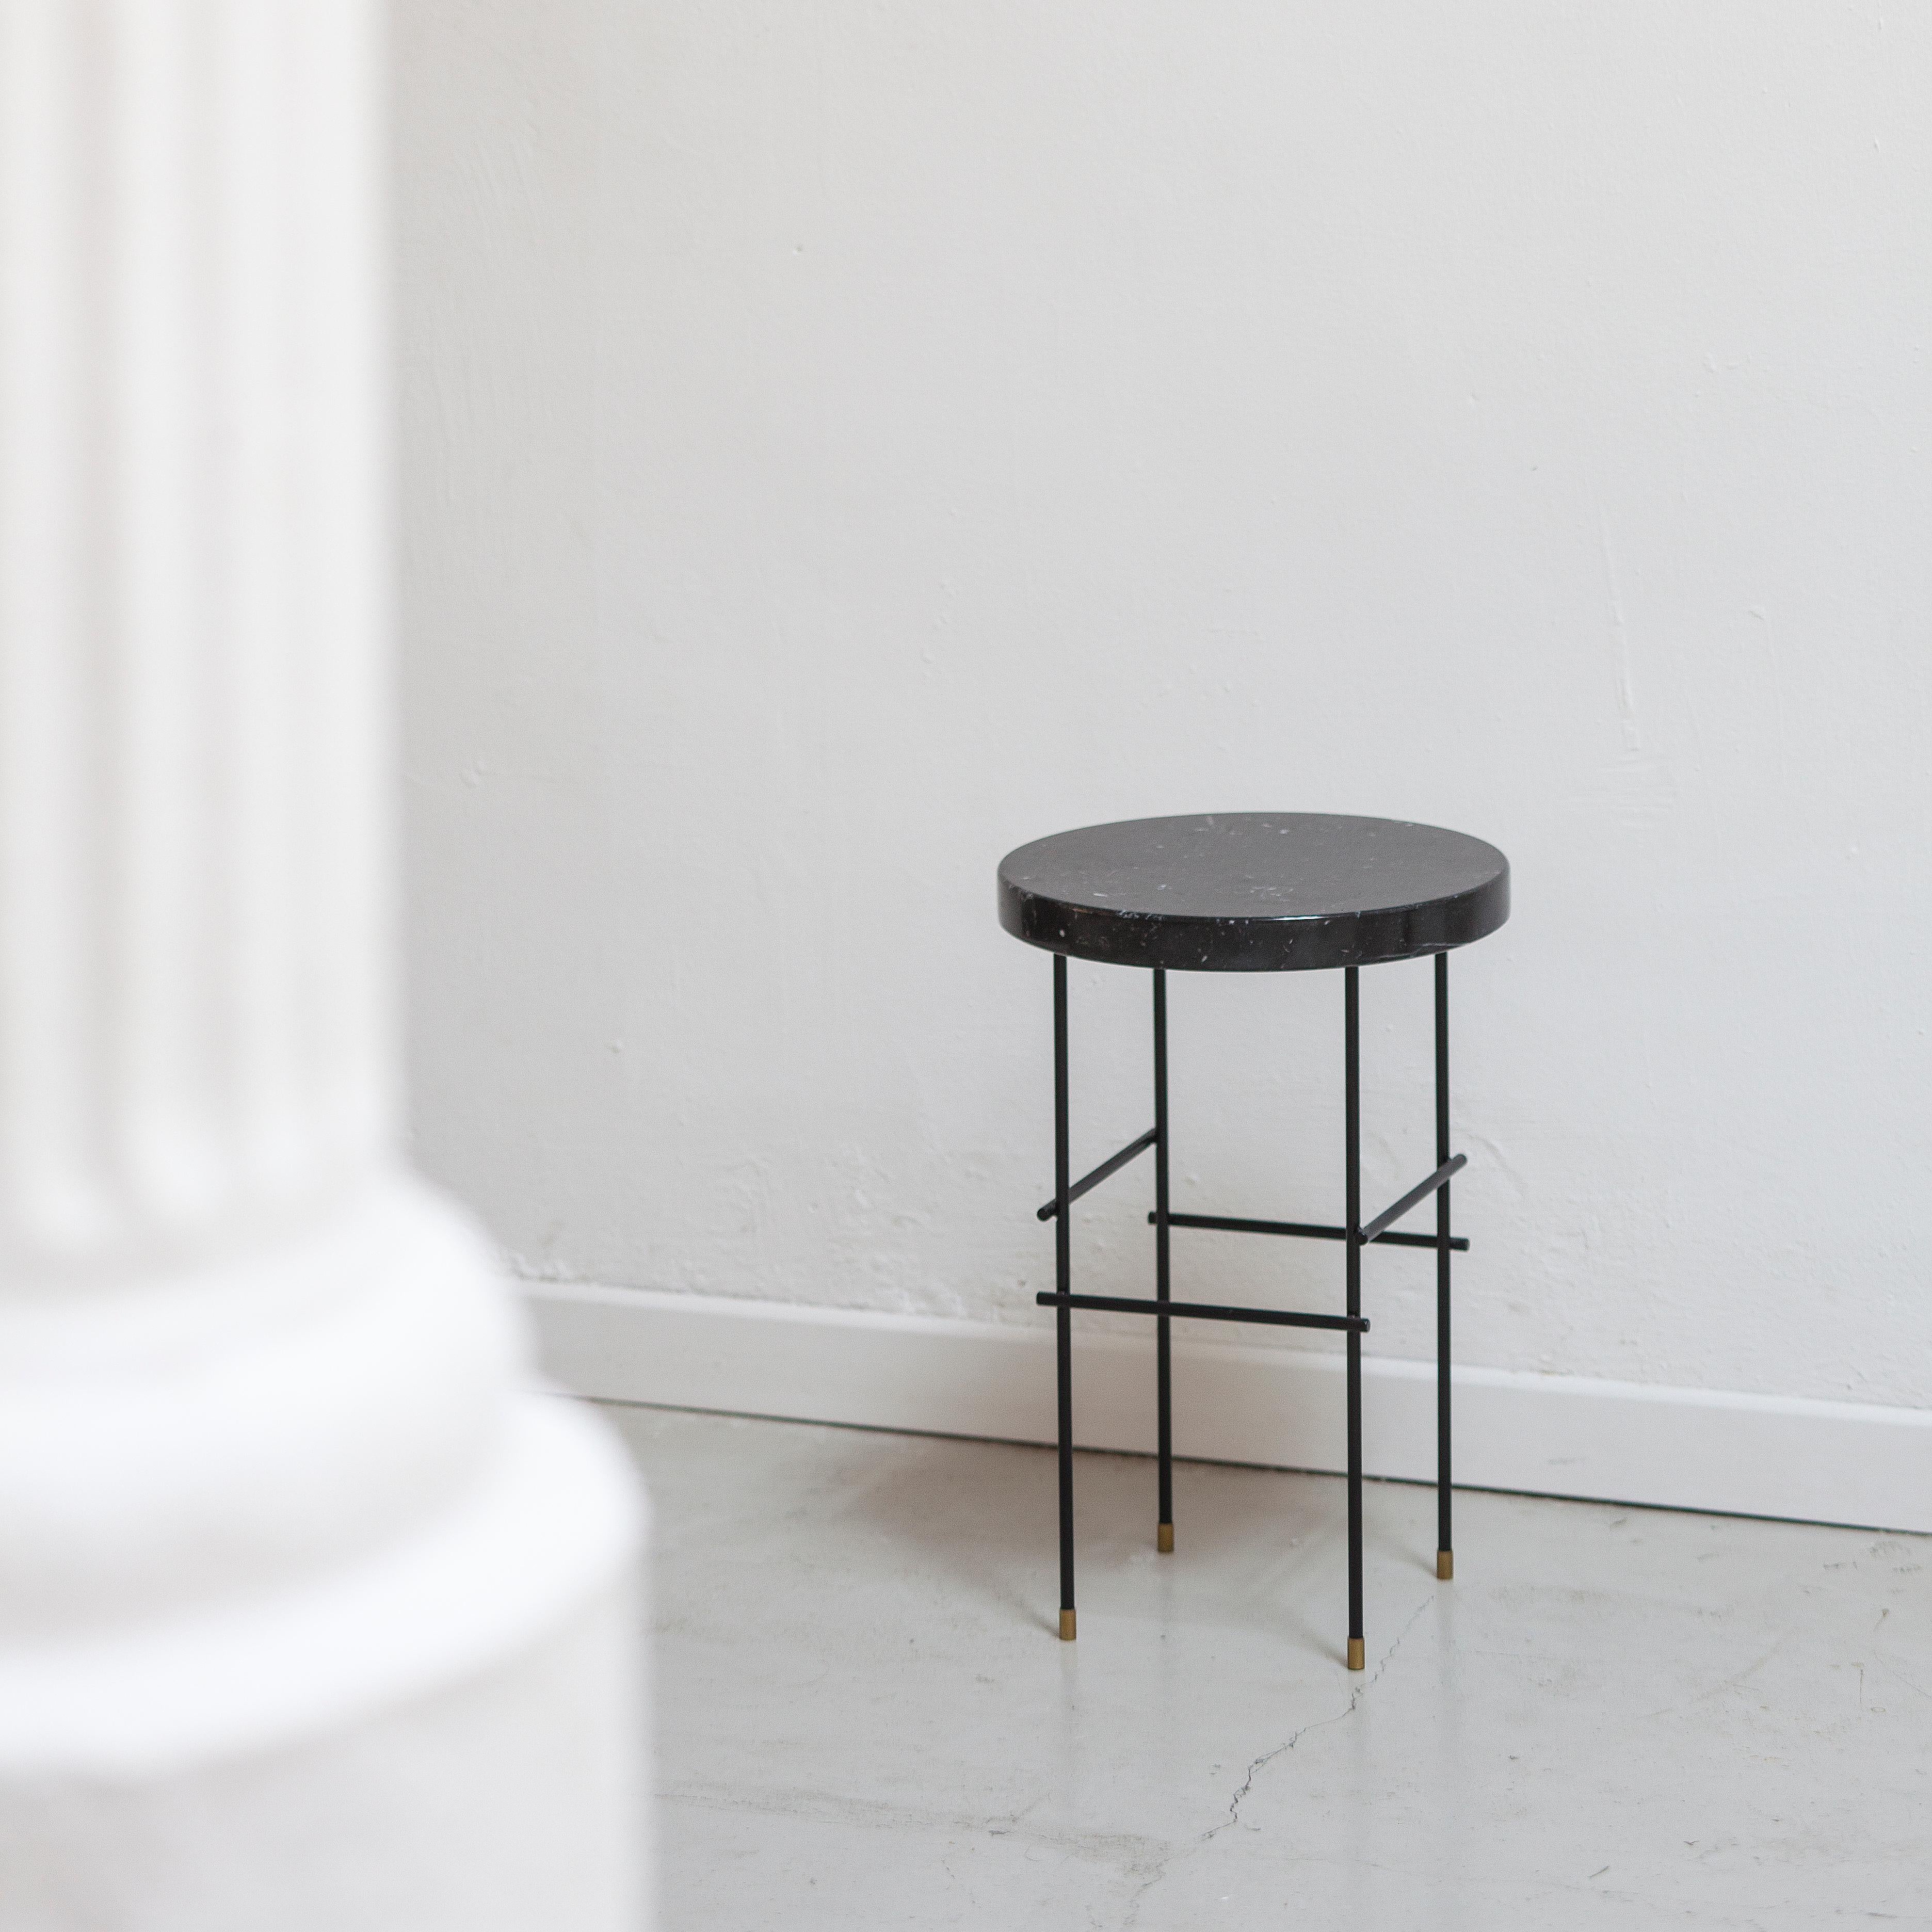 For the lovers of the singularity, Marblelous Pedestal is a pedestal which has been designed to expose the thing you love the most. Made with premium Marquina marble and solid lacquered iron tubes, the Marblelous Pedestal uses a minimalist design to